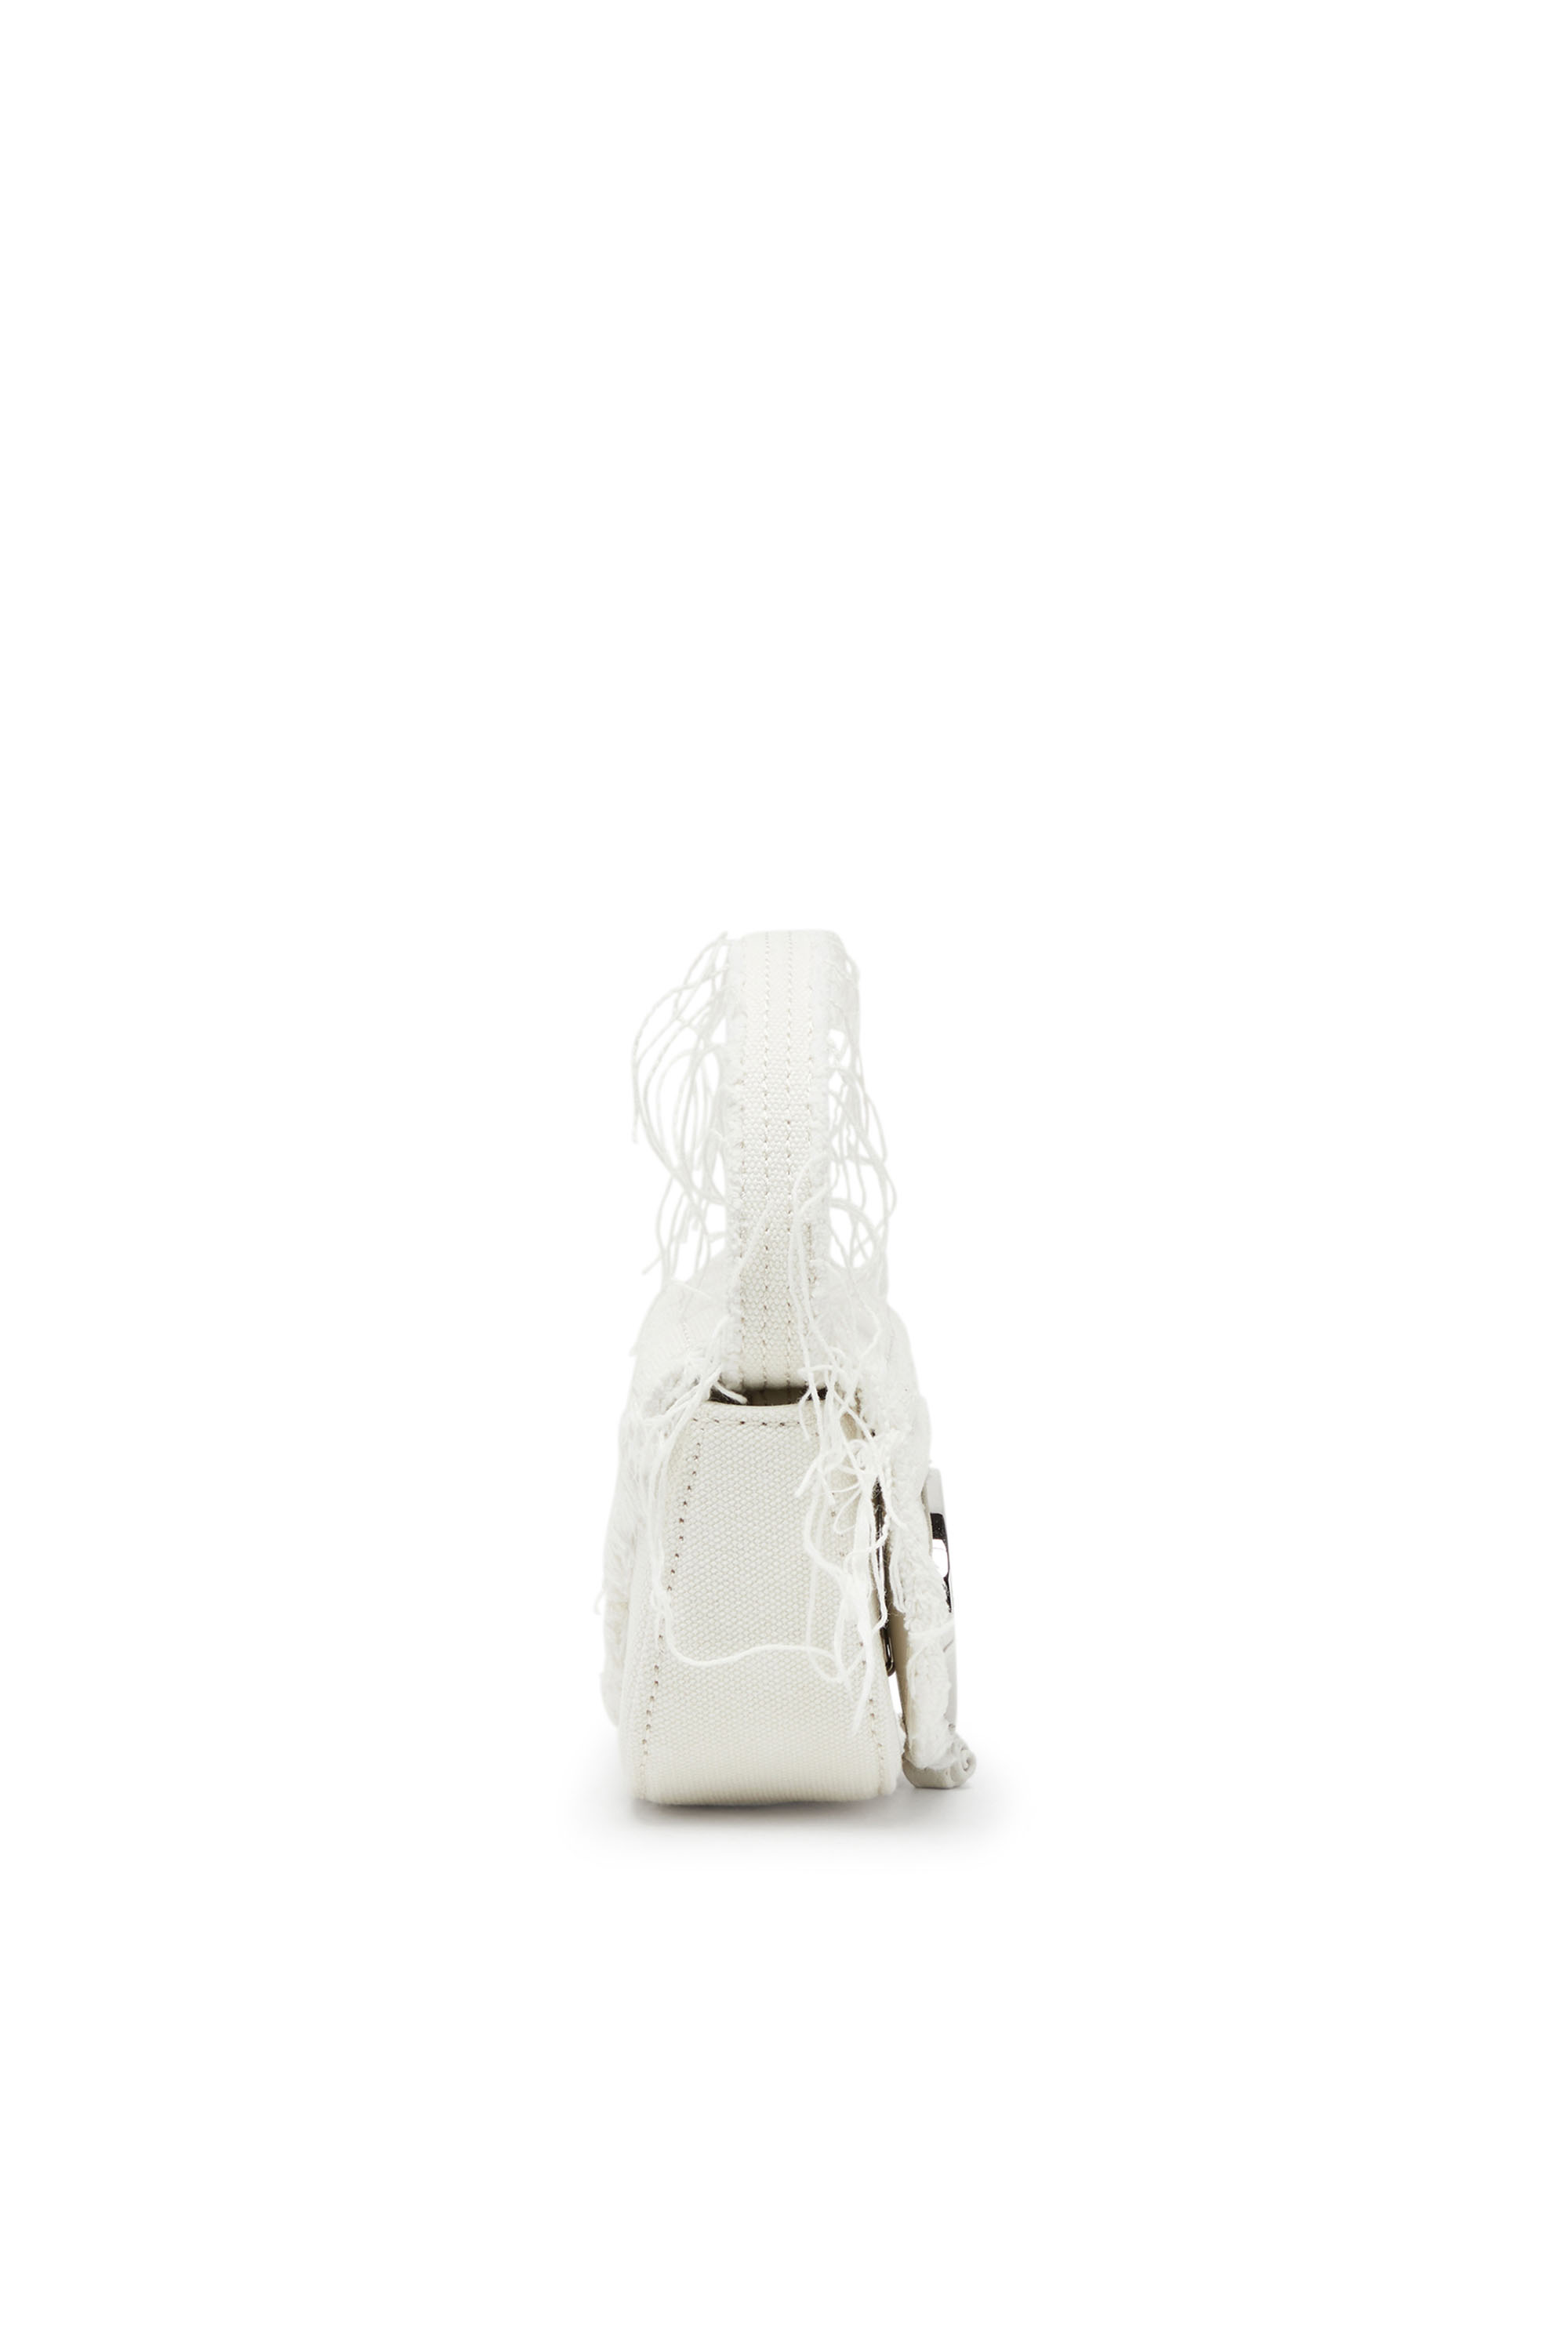 Diesel - 1DR XS, Female 1DR XS-Iconic mini bag in canvas and leather in ホワイト - Image 3